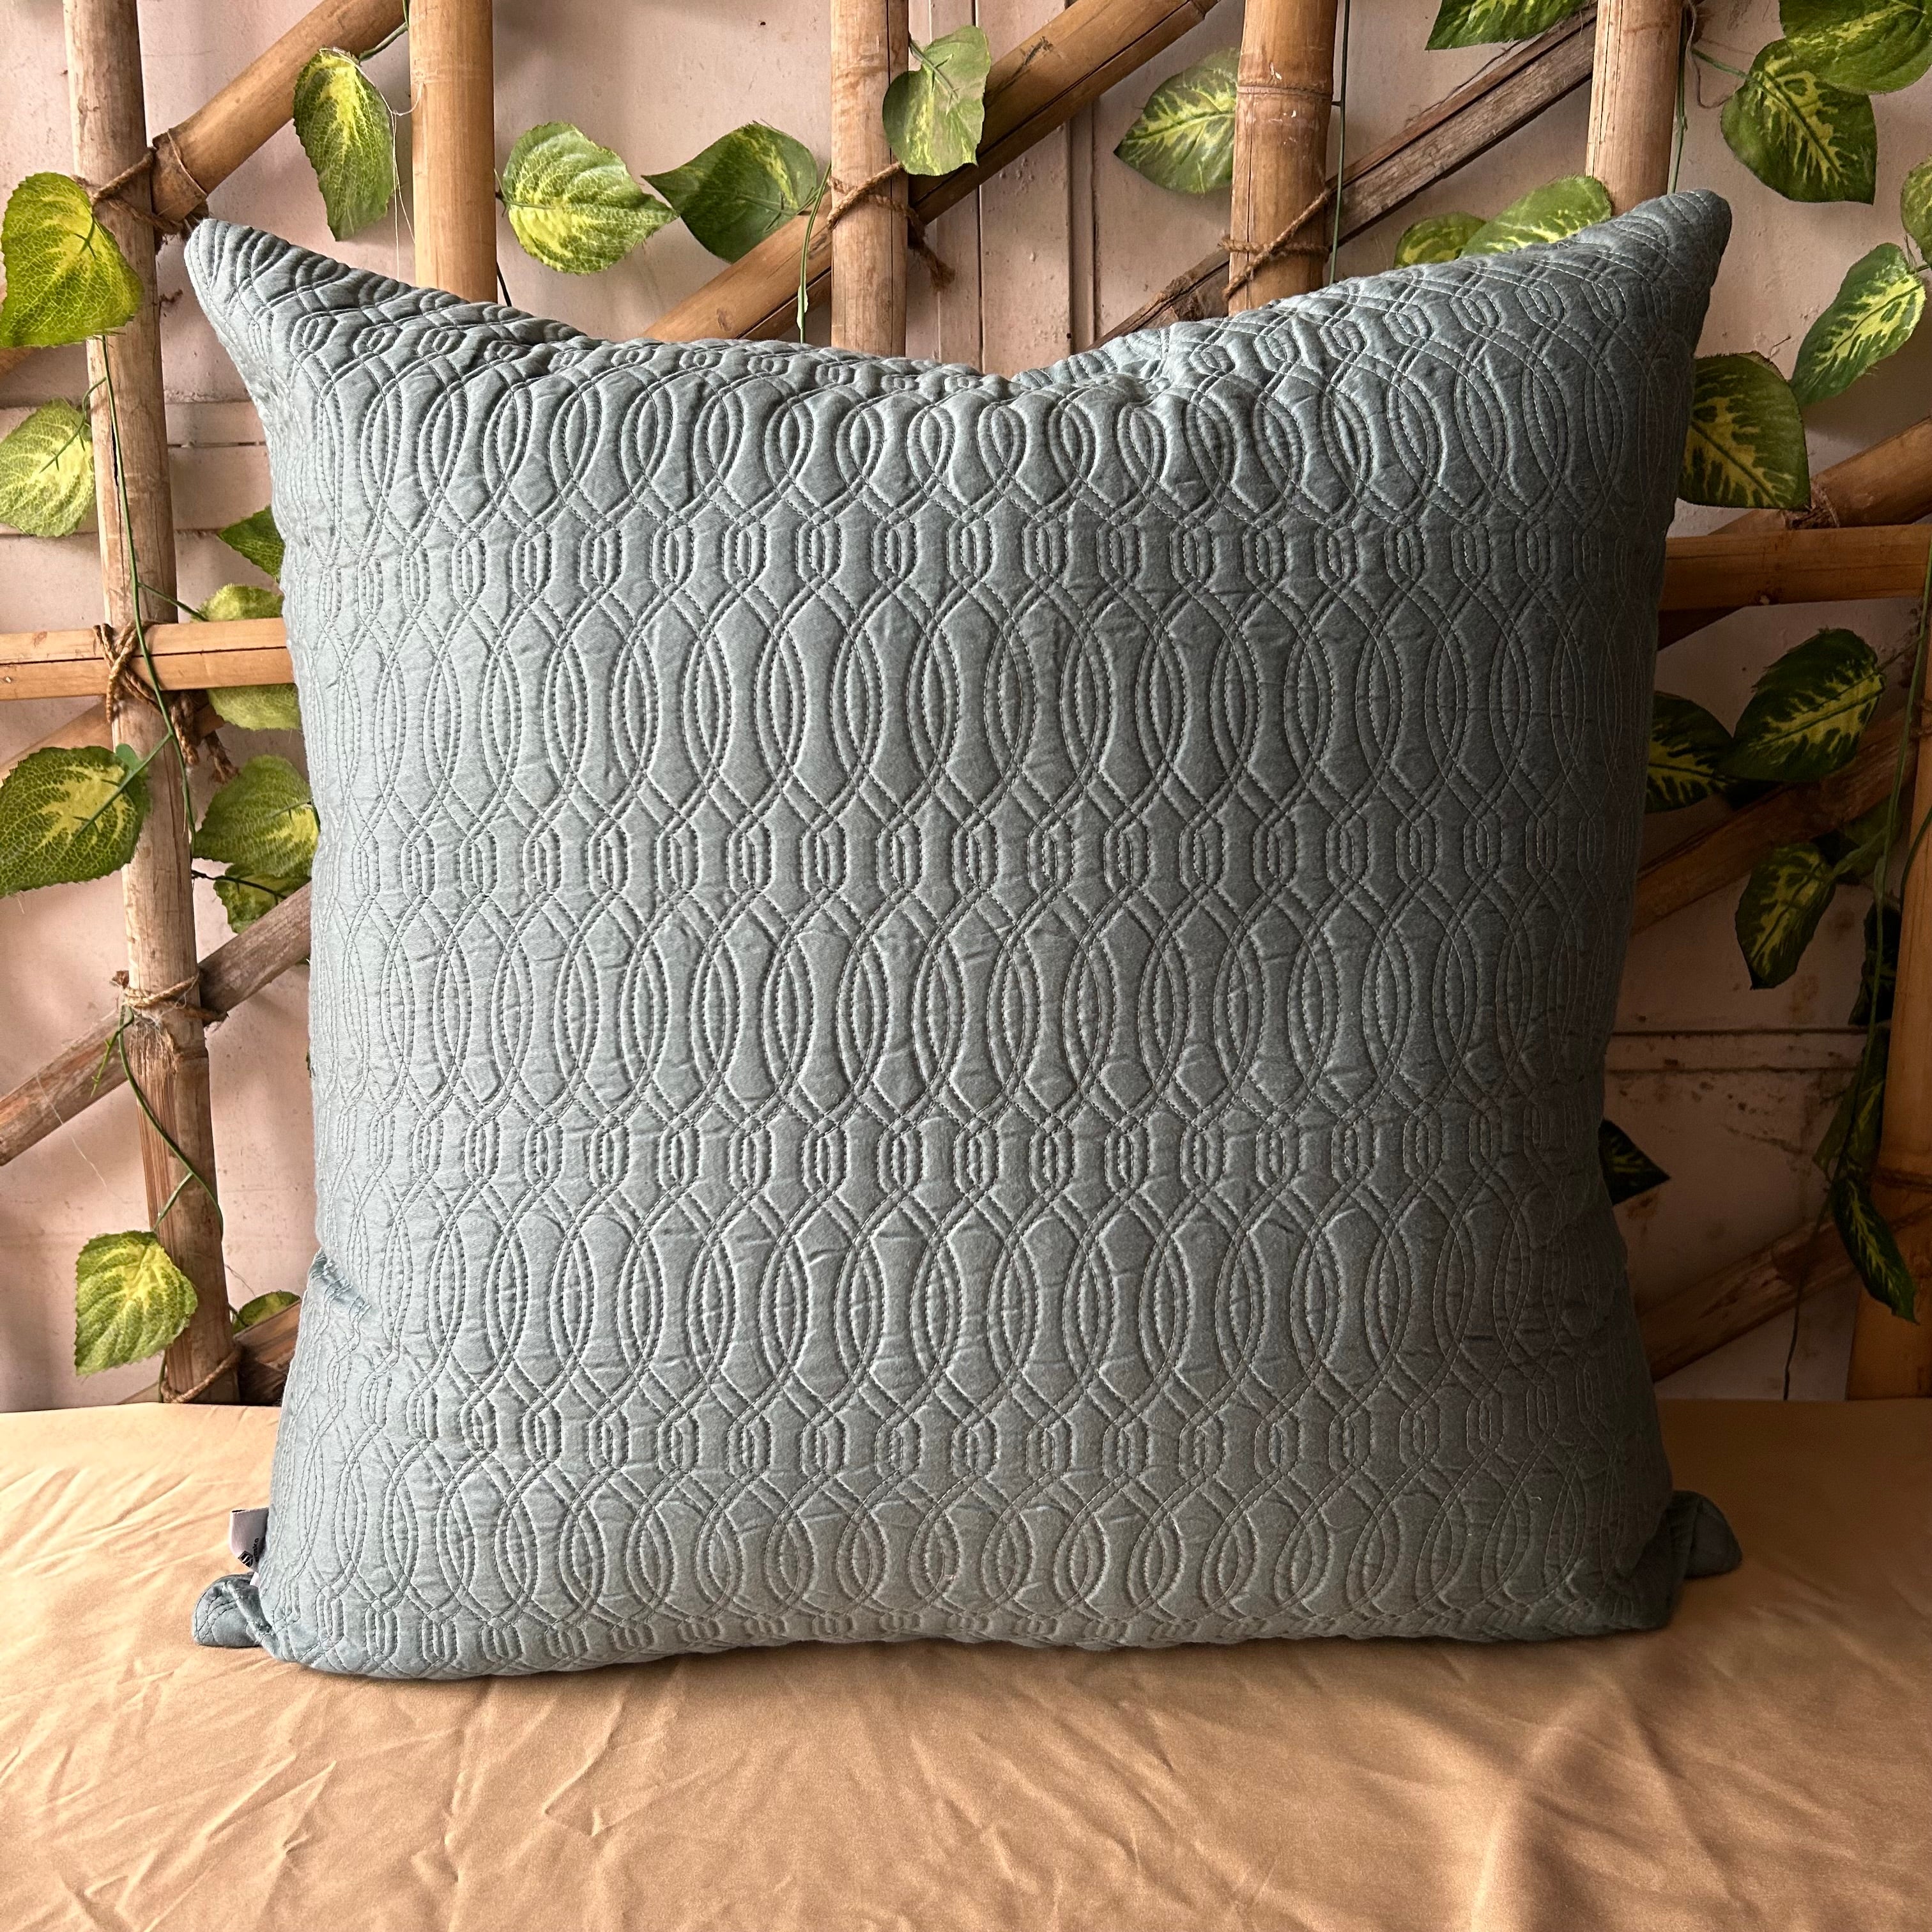 Teal and Taupe Quilted Reversible Cotton Euro Sham